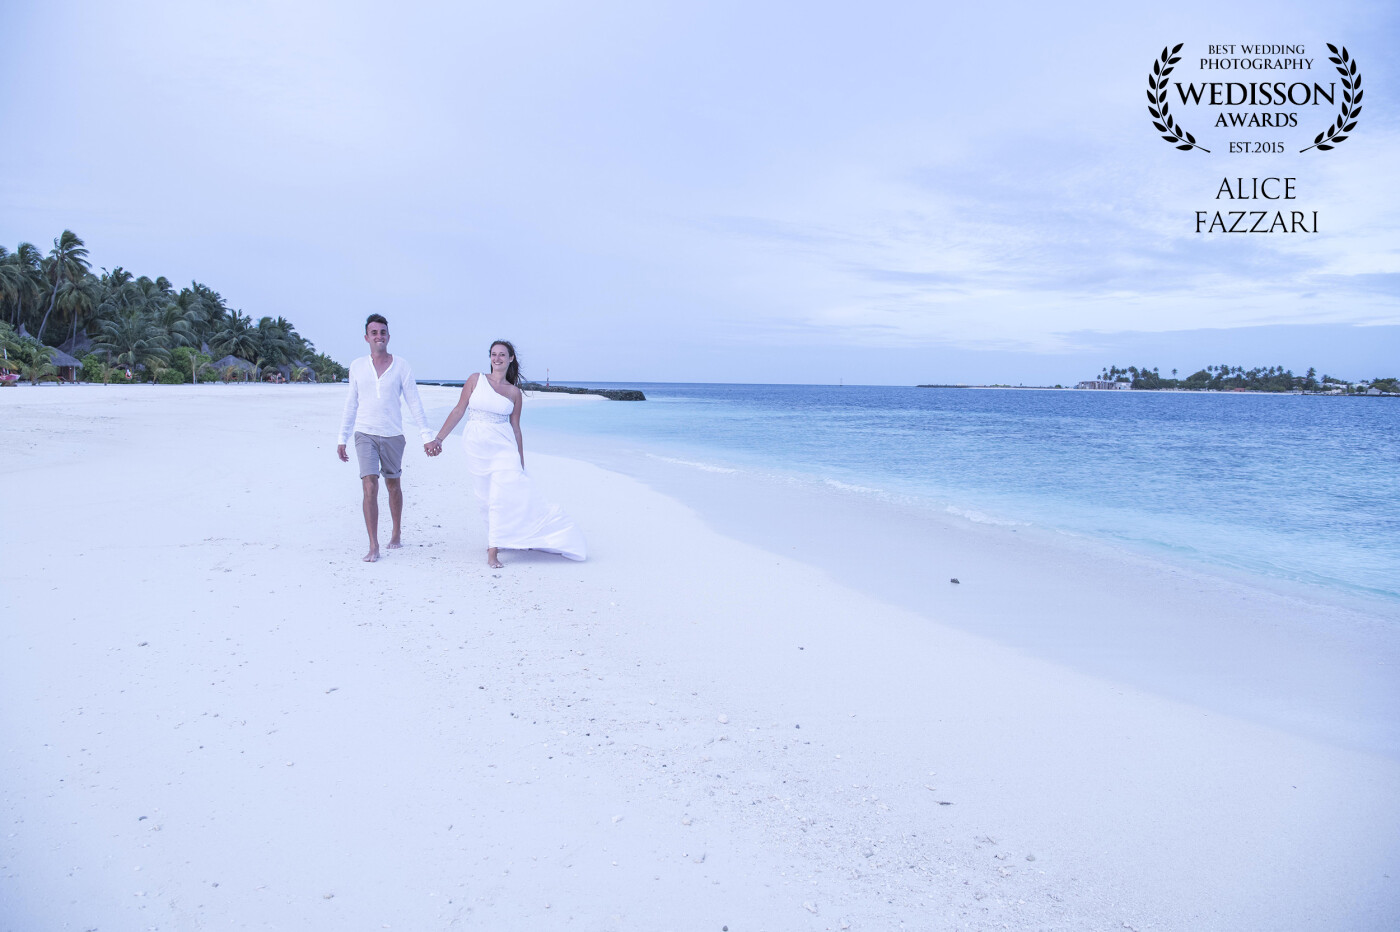 Alice and Marco,  a young , beautiful italian couple went to Maldives to get married! <br />
I've been more than happy to be there to capture all the moments of this amazing wedding. 